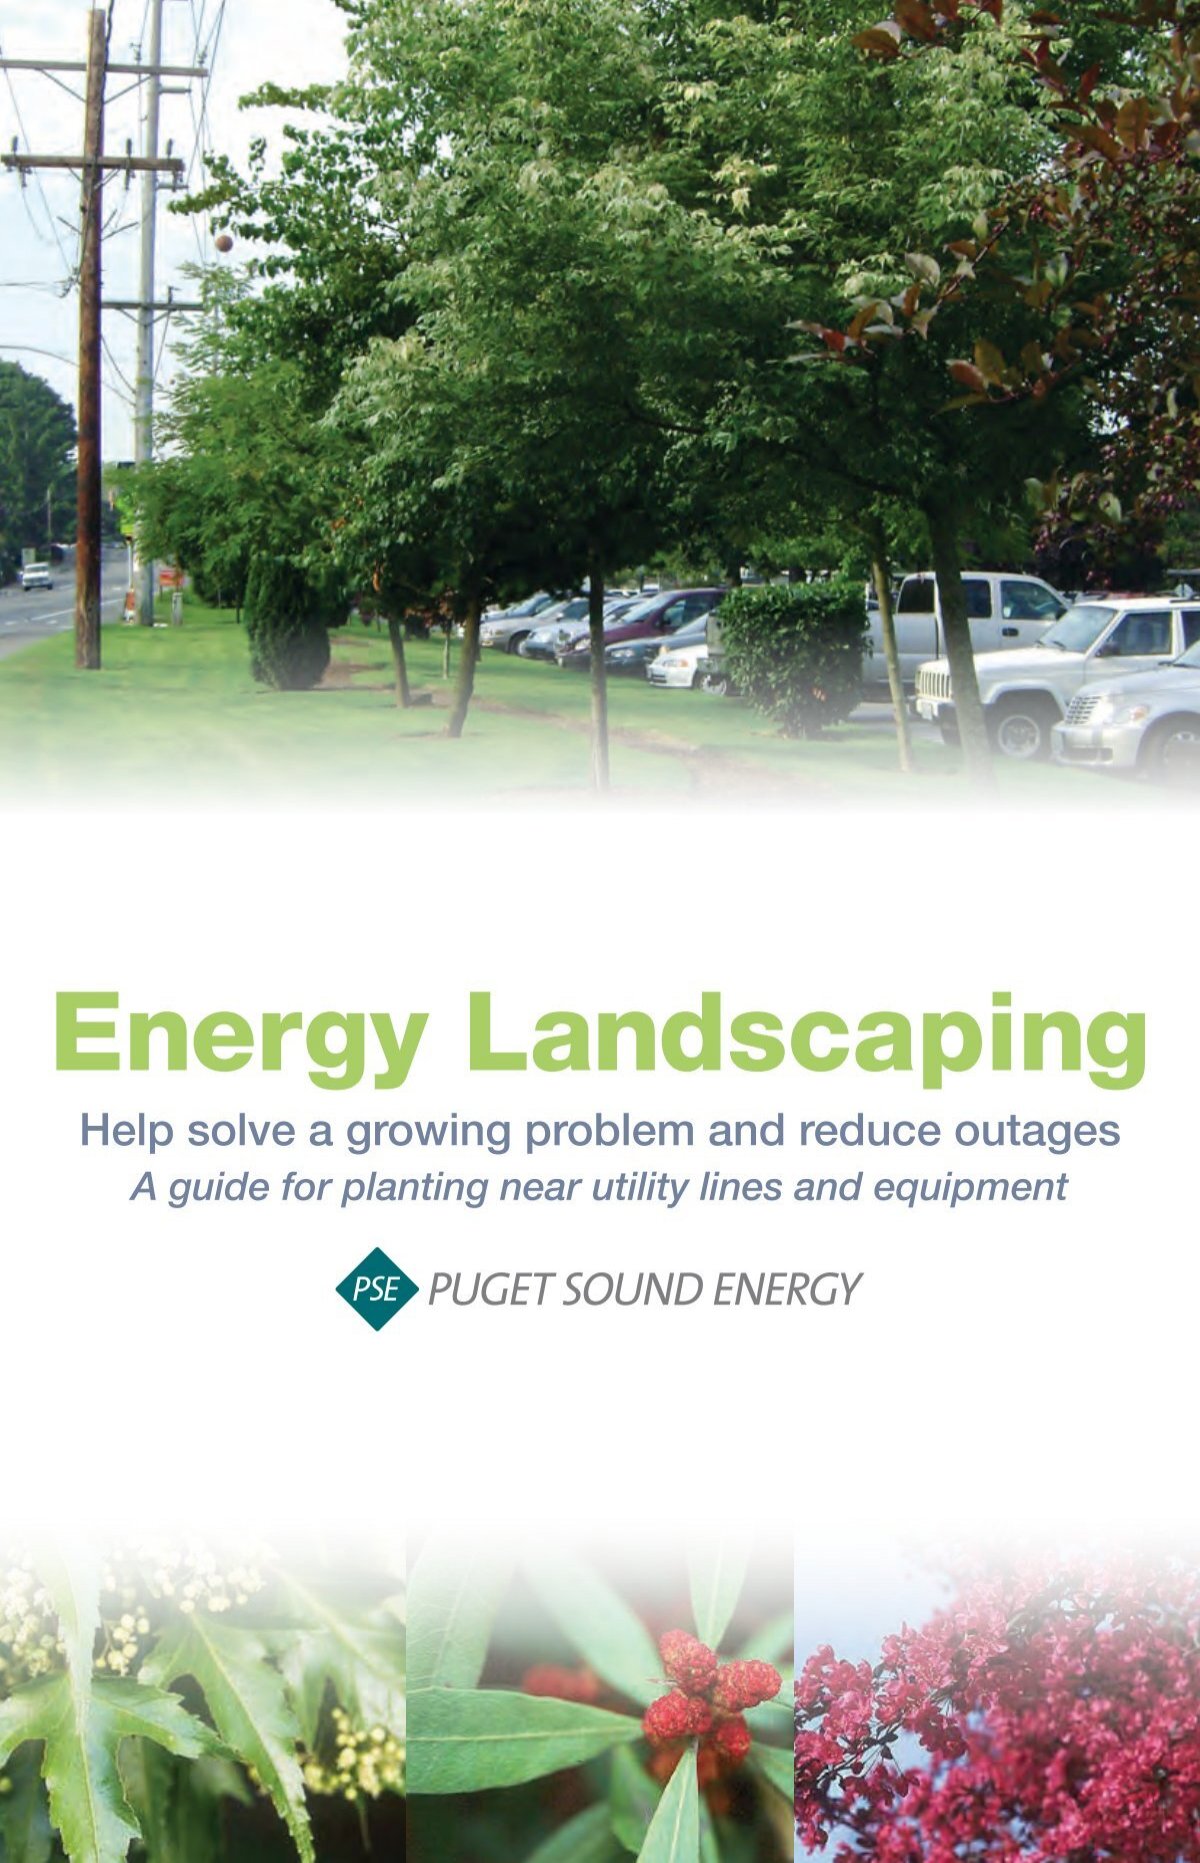 energy-landscaping-booklet-puget-sound-energy